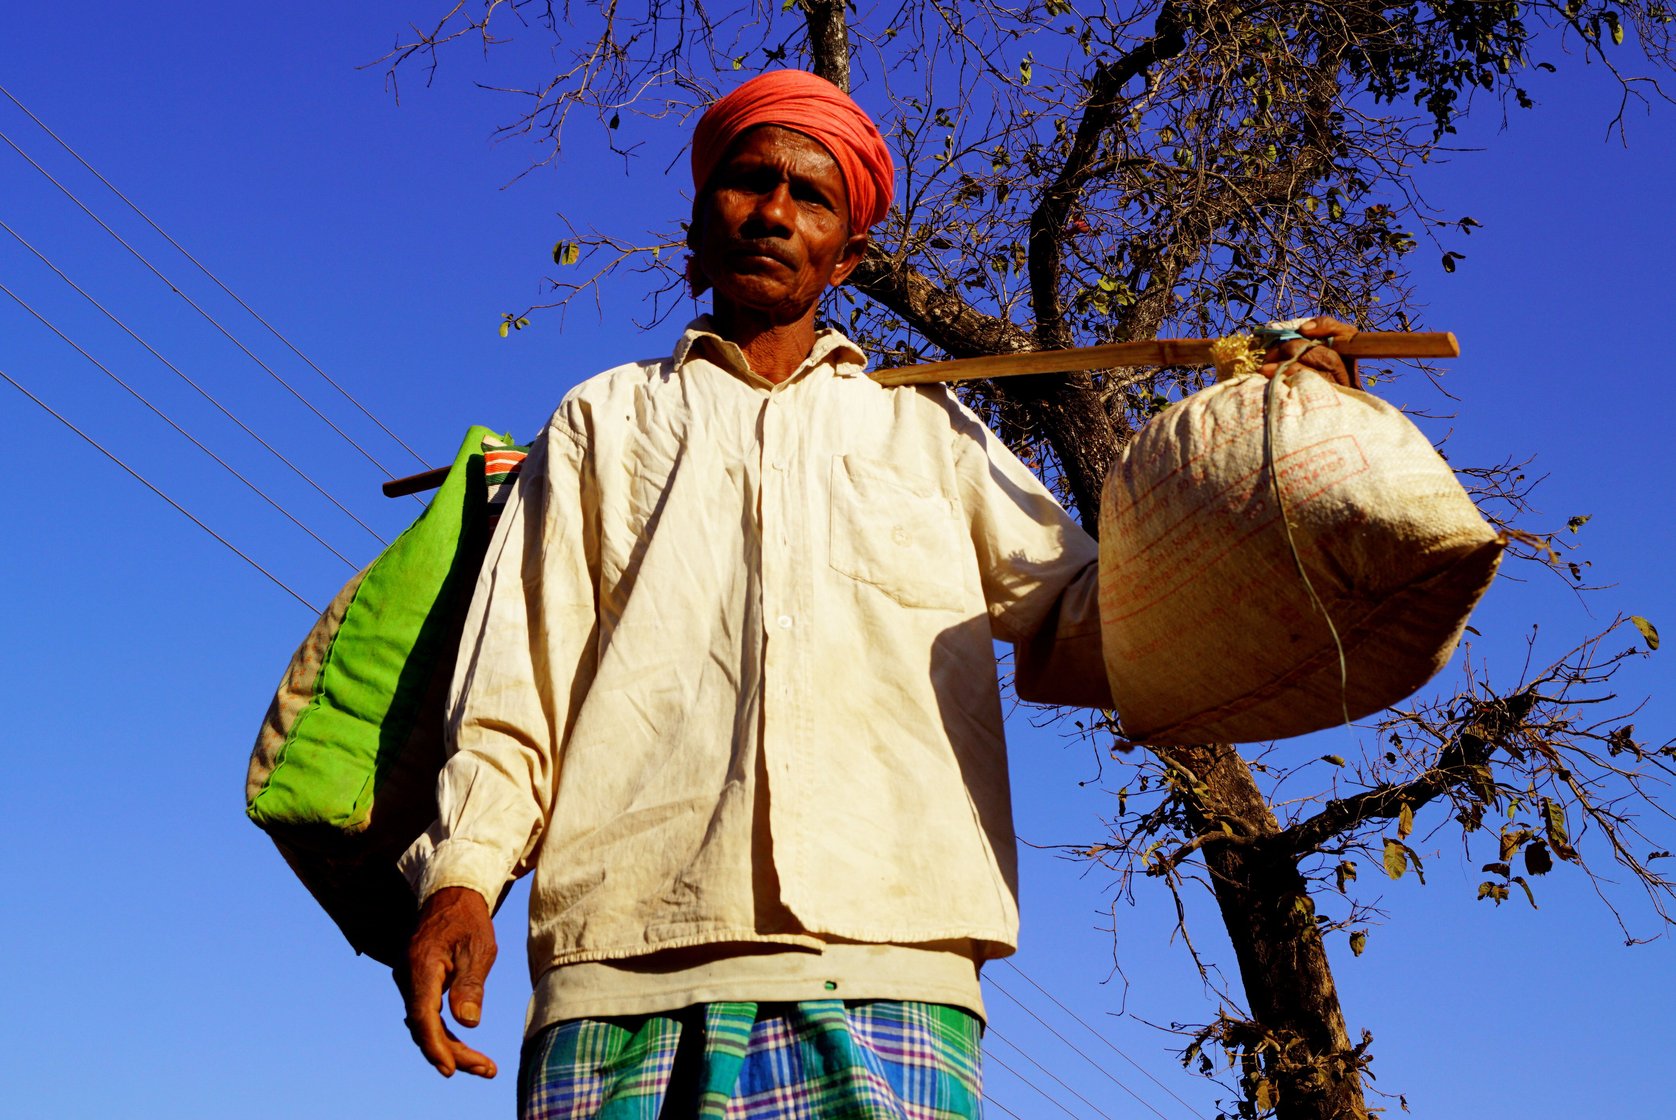 Itwaru, a farmer and farm labourer from nearby Kohcur village, is here to purchase mahua flowers and grapes to make wine